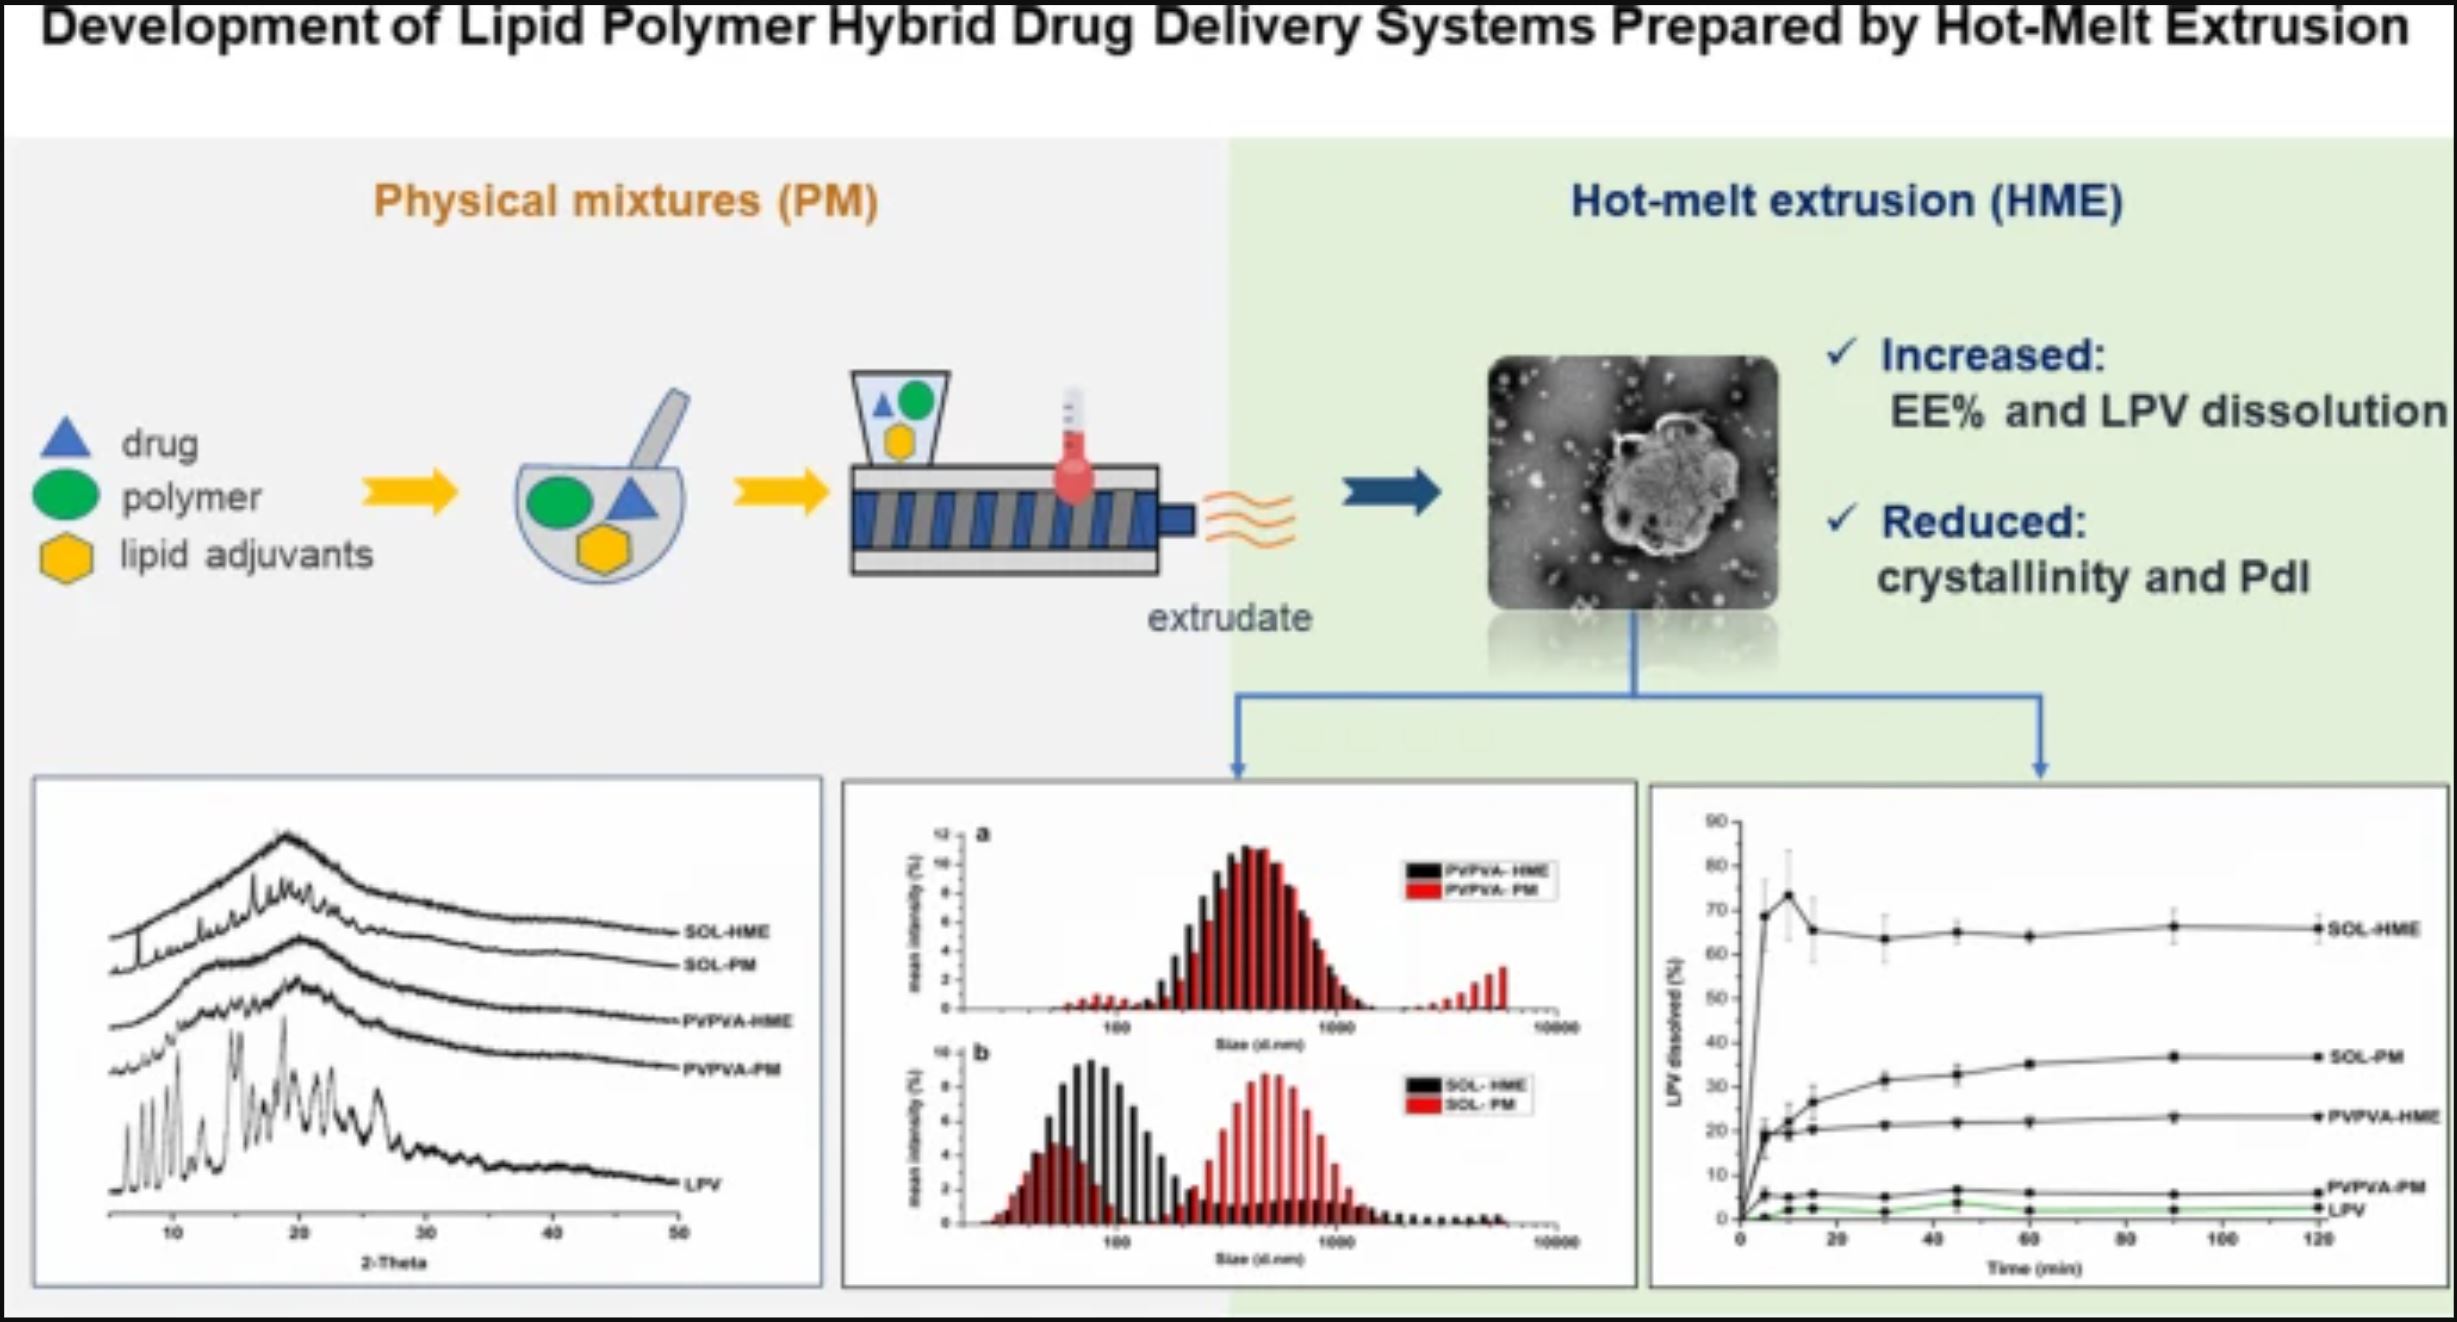 Development of Lipid Polymer Hybrid Drug Delivery Systems Prepared by Hot-Melt Extrusion